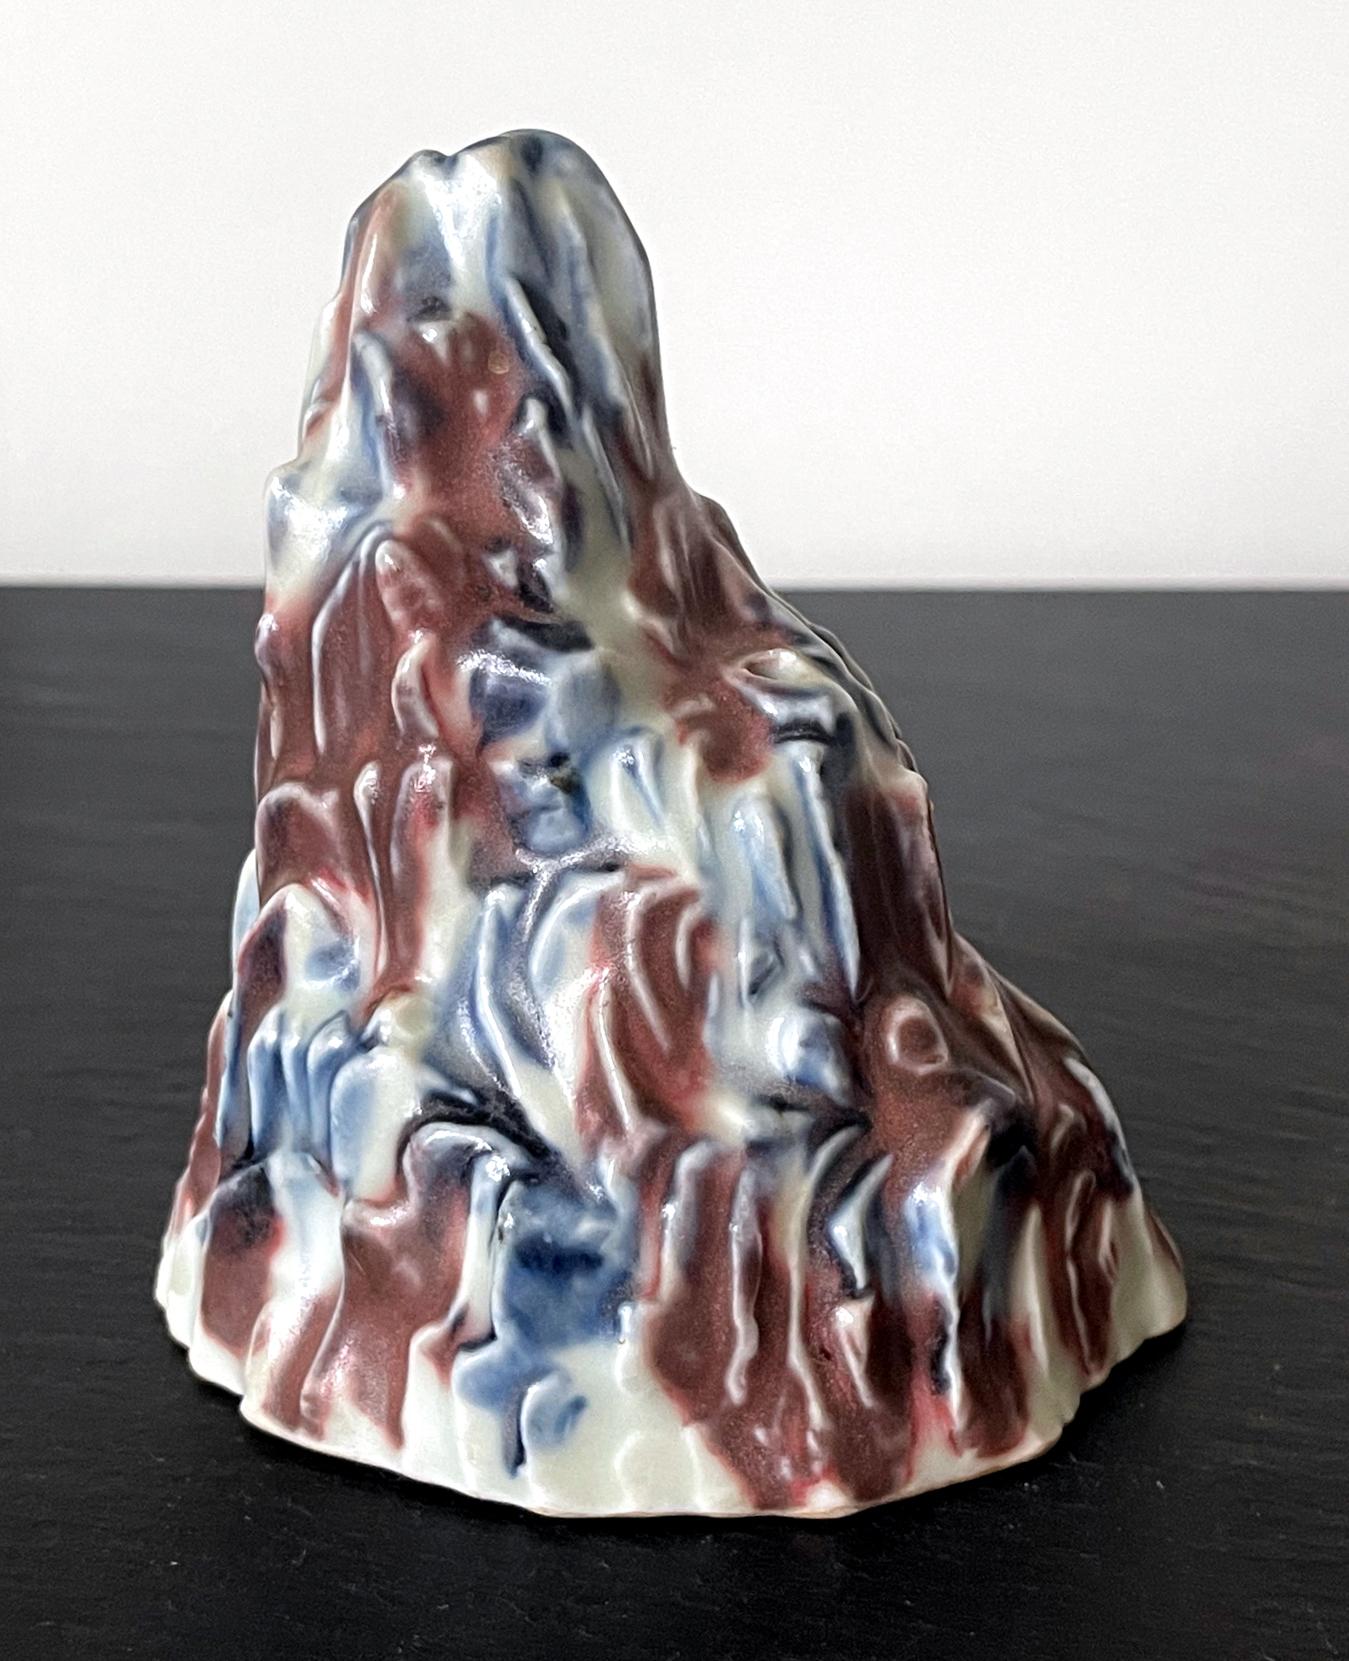 A Korean ceramic water dropper in the shape of a mountain from late Joseon Dynasty circa 1850-1900s. The lovely piece takes a shape of a rugged mountain peak with crags and furrows, hand-shaped by the potter. The surface was applied with blue and